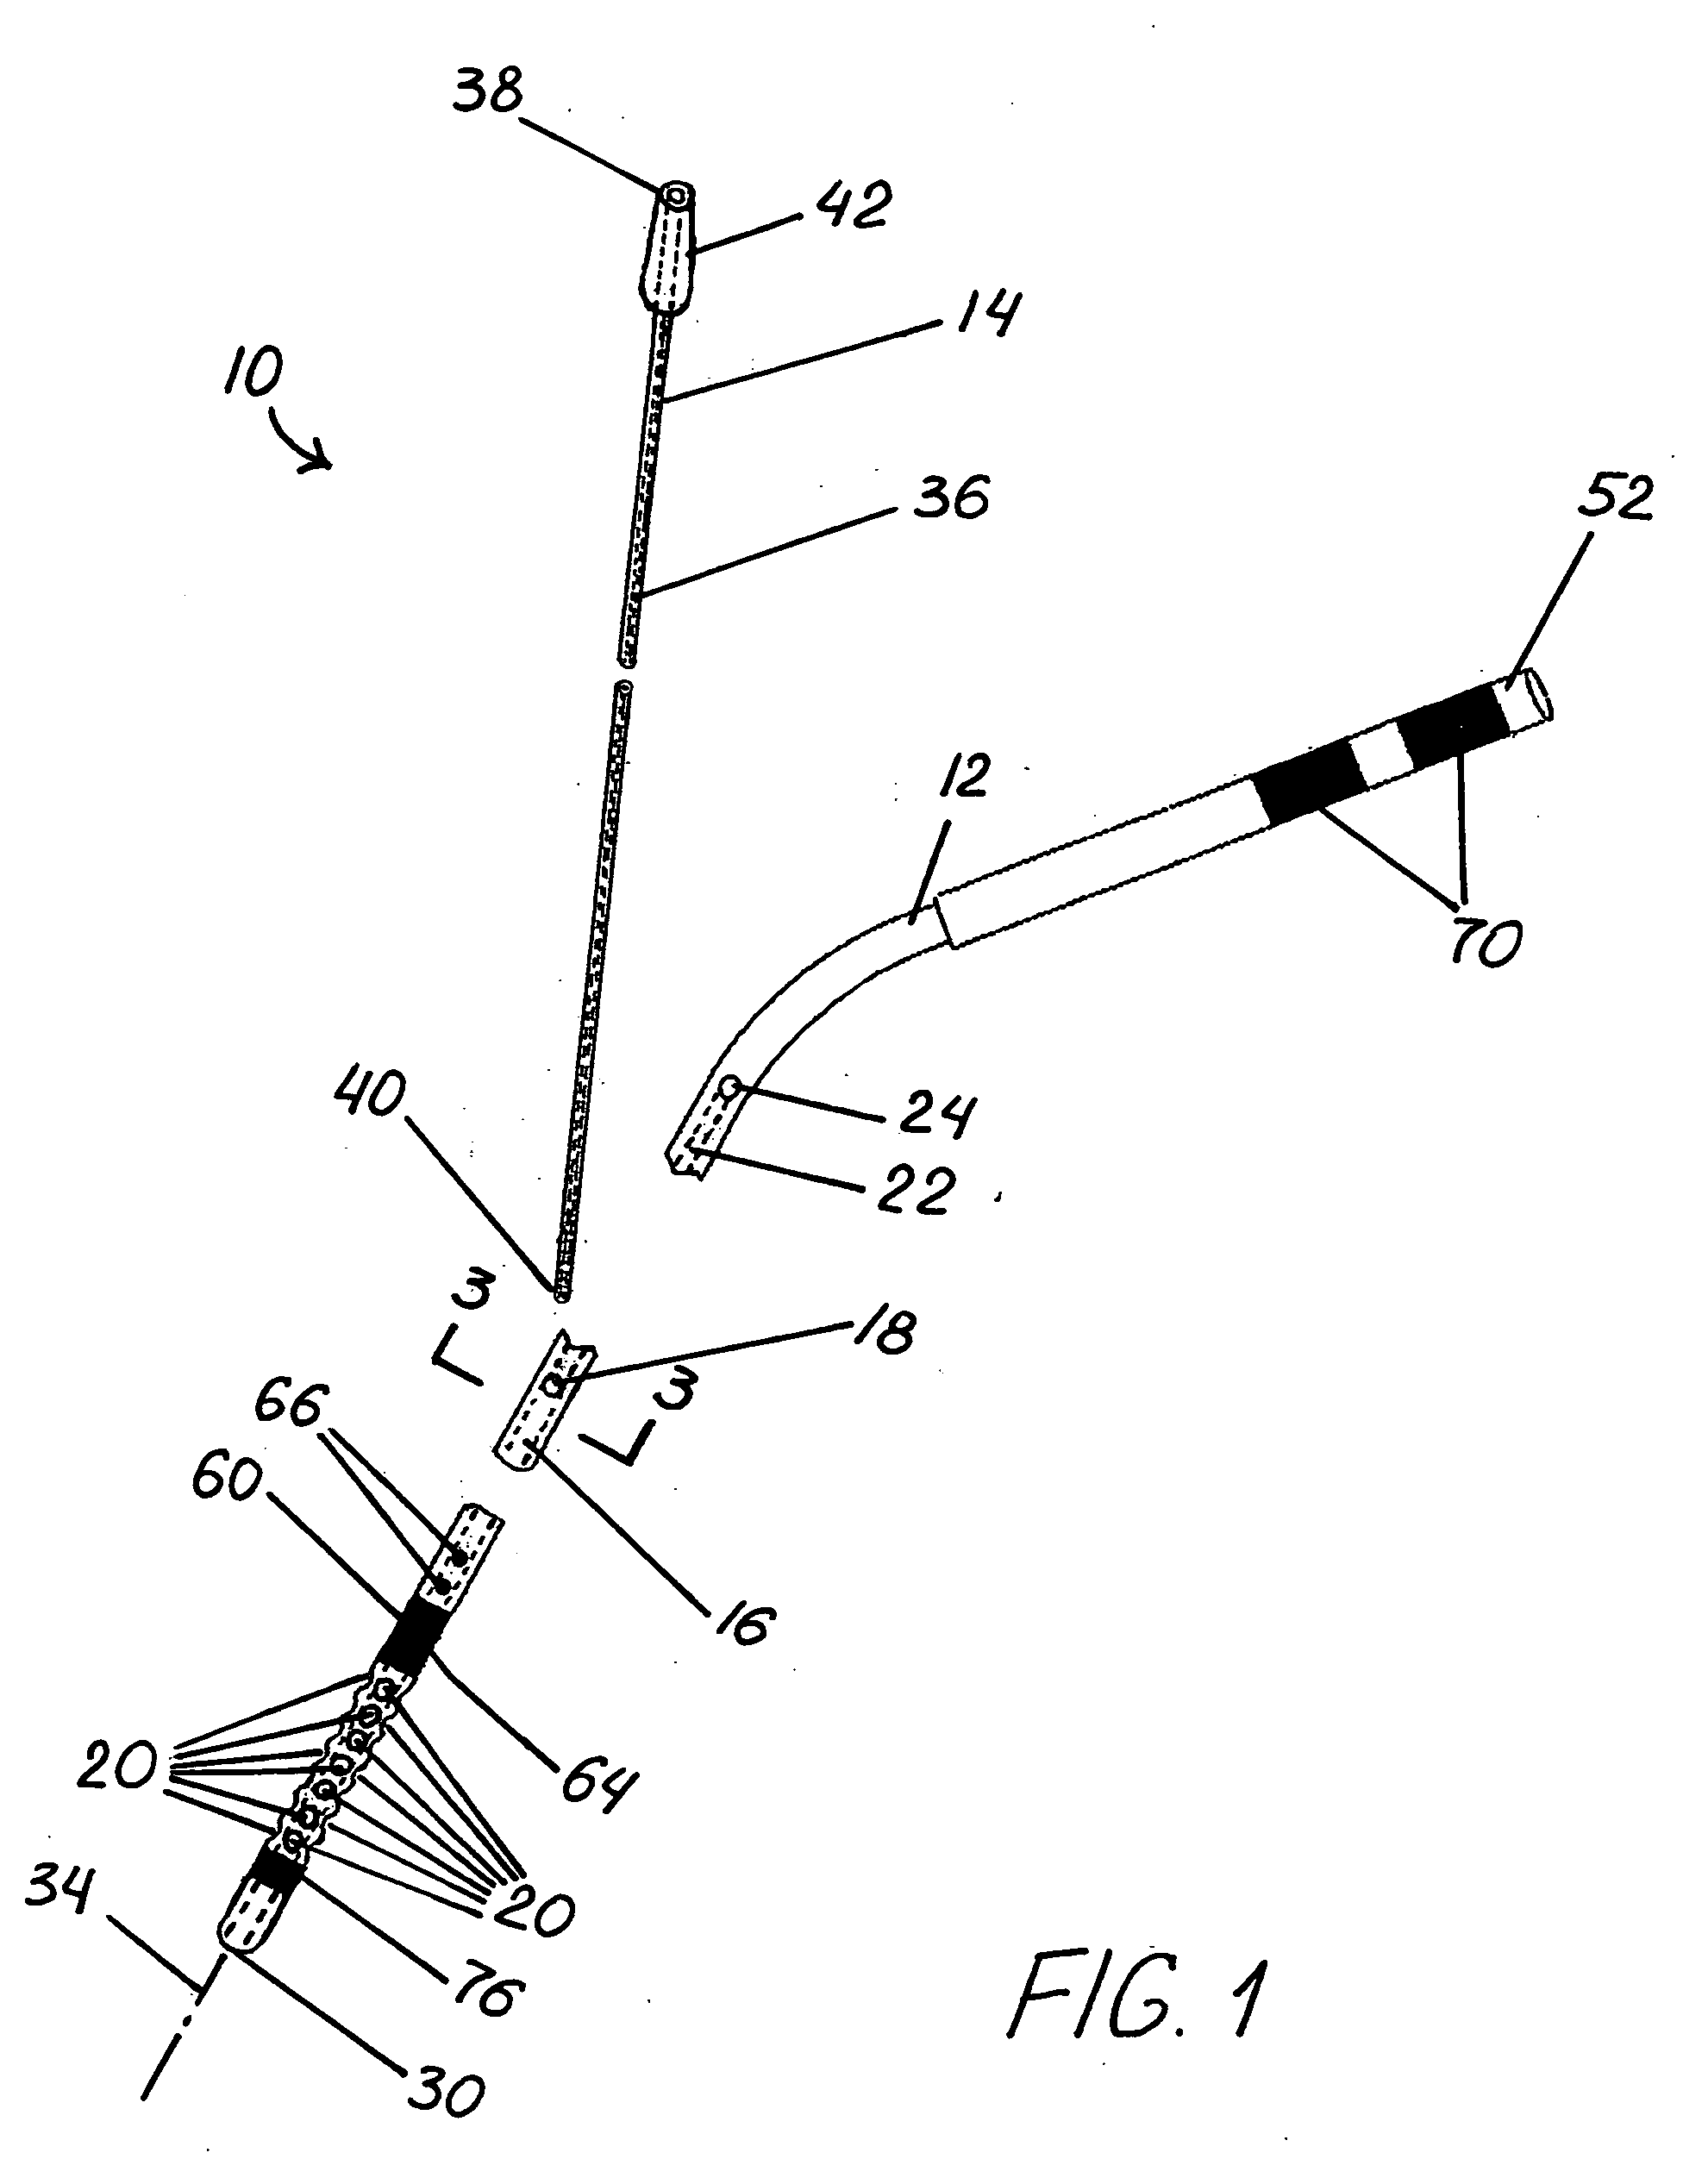 Catheter assembly for intracranial treatment using dual lumens